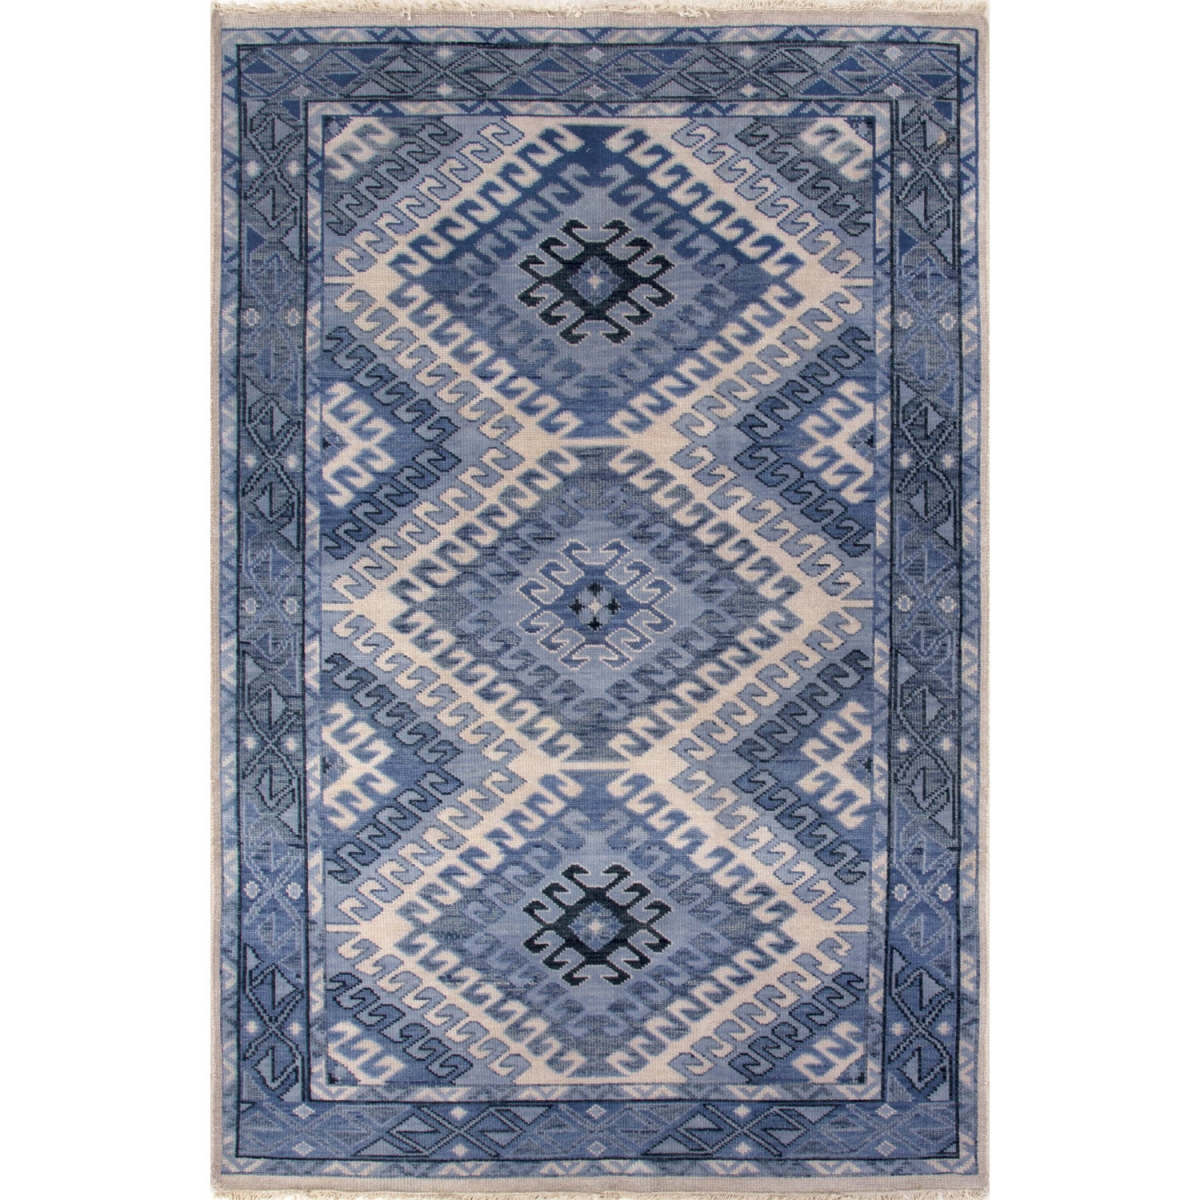 Rug118570 5 X 8 Ft. 6 In. Village Artemis Hobbs Hand-knotted Geometric Blue & Light Gray Area Rug